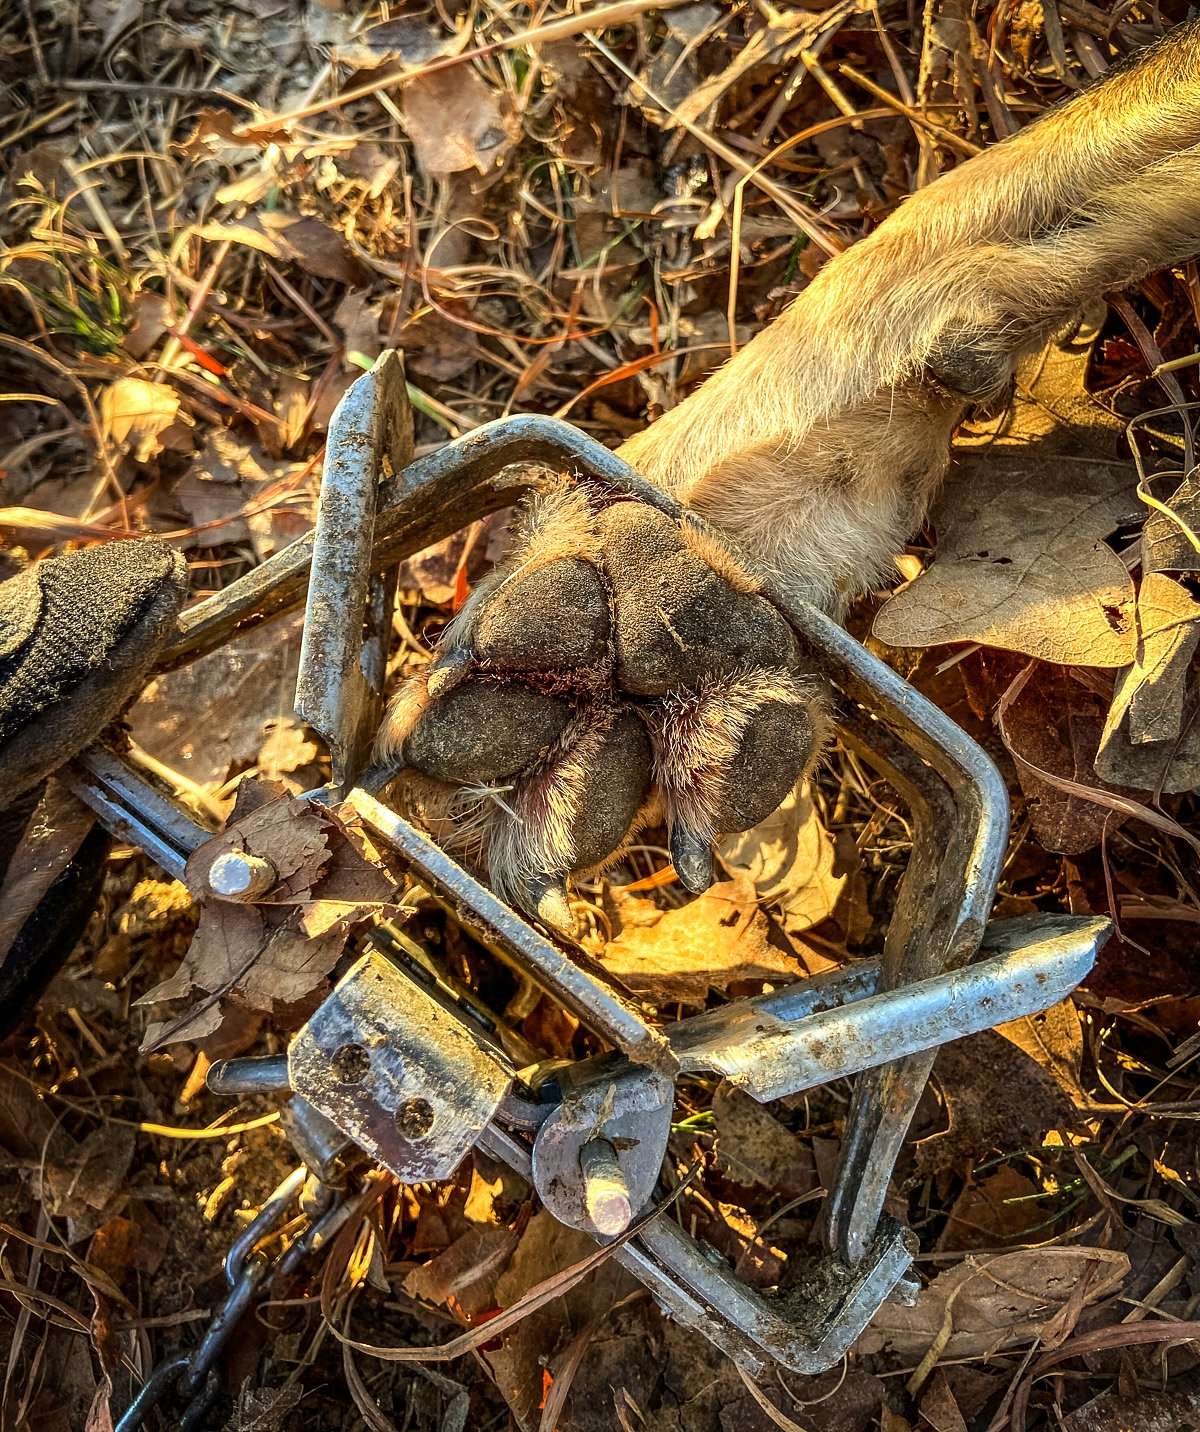 Investing in good equipment will help you catch more coyotes. 